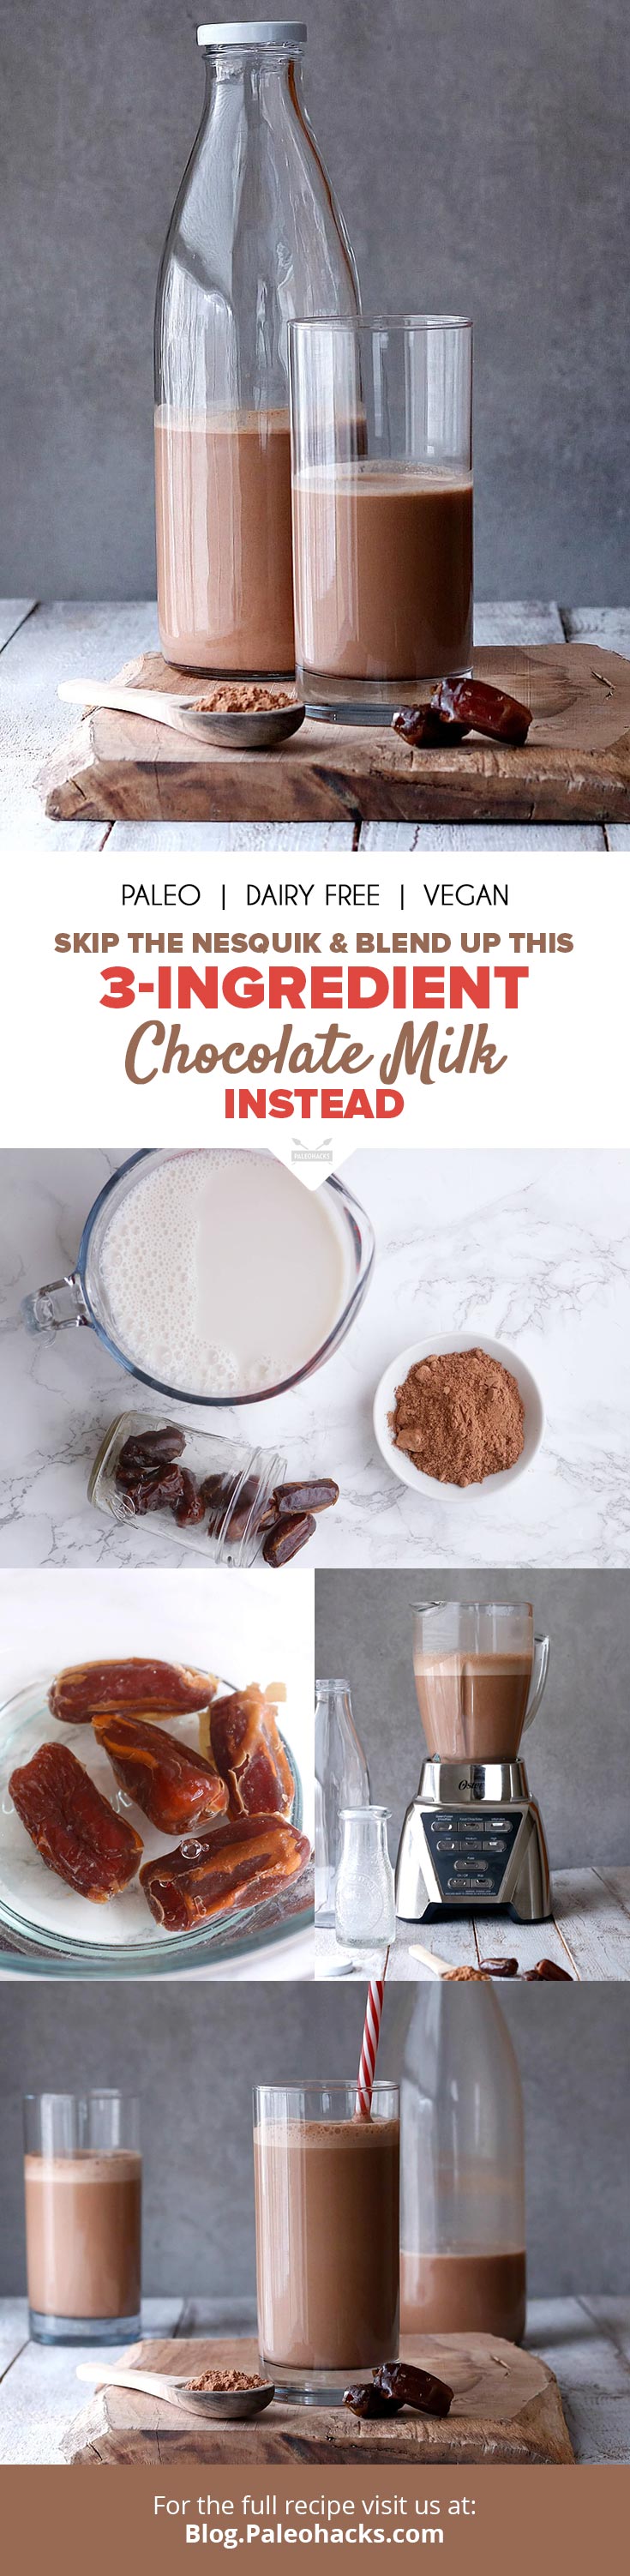 Chocolate milk gets a healthy makeover with this 3-ingredient drink that stops chocolate cravings in its tracks.